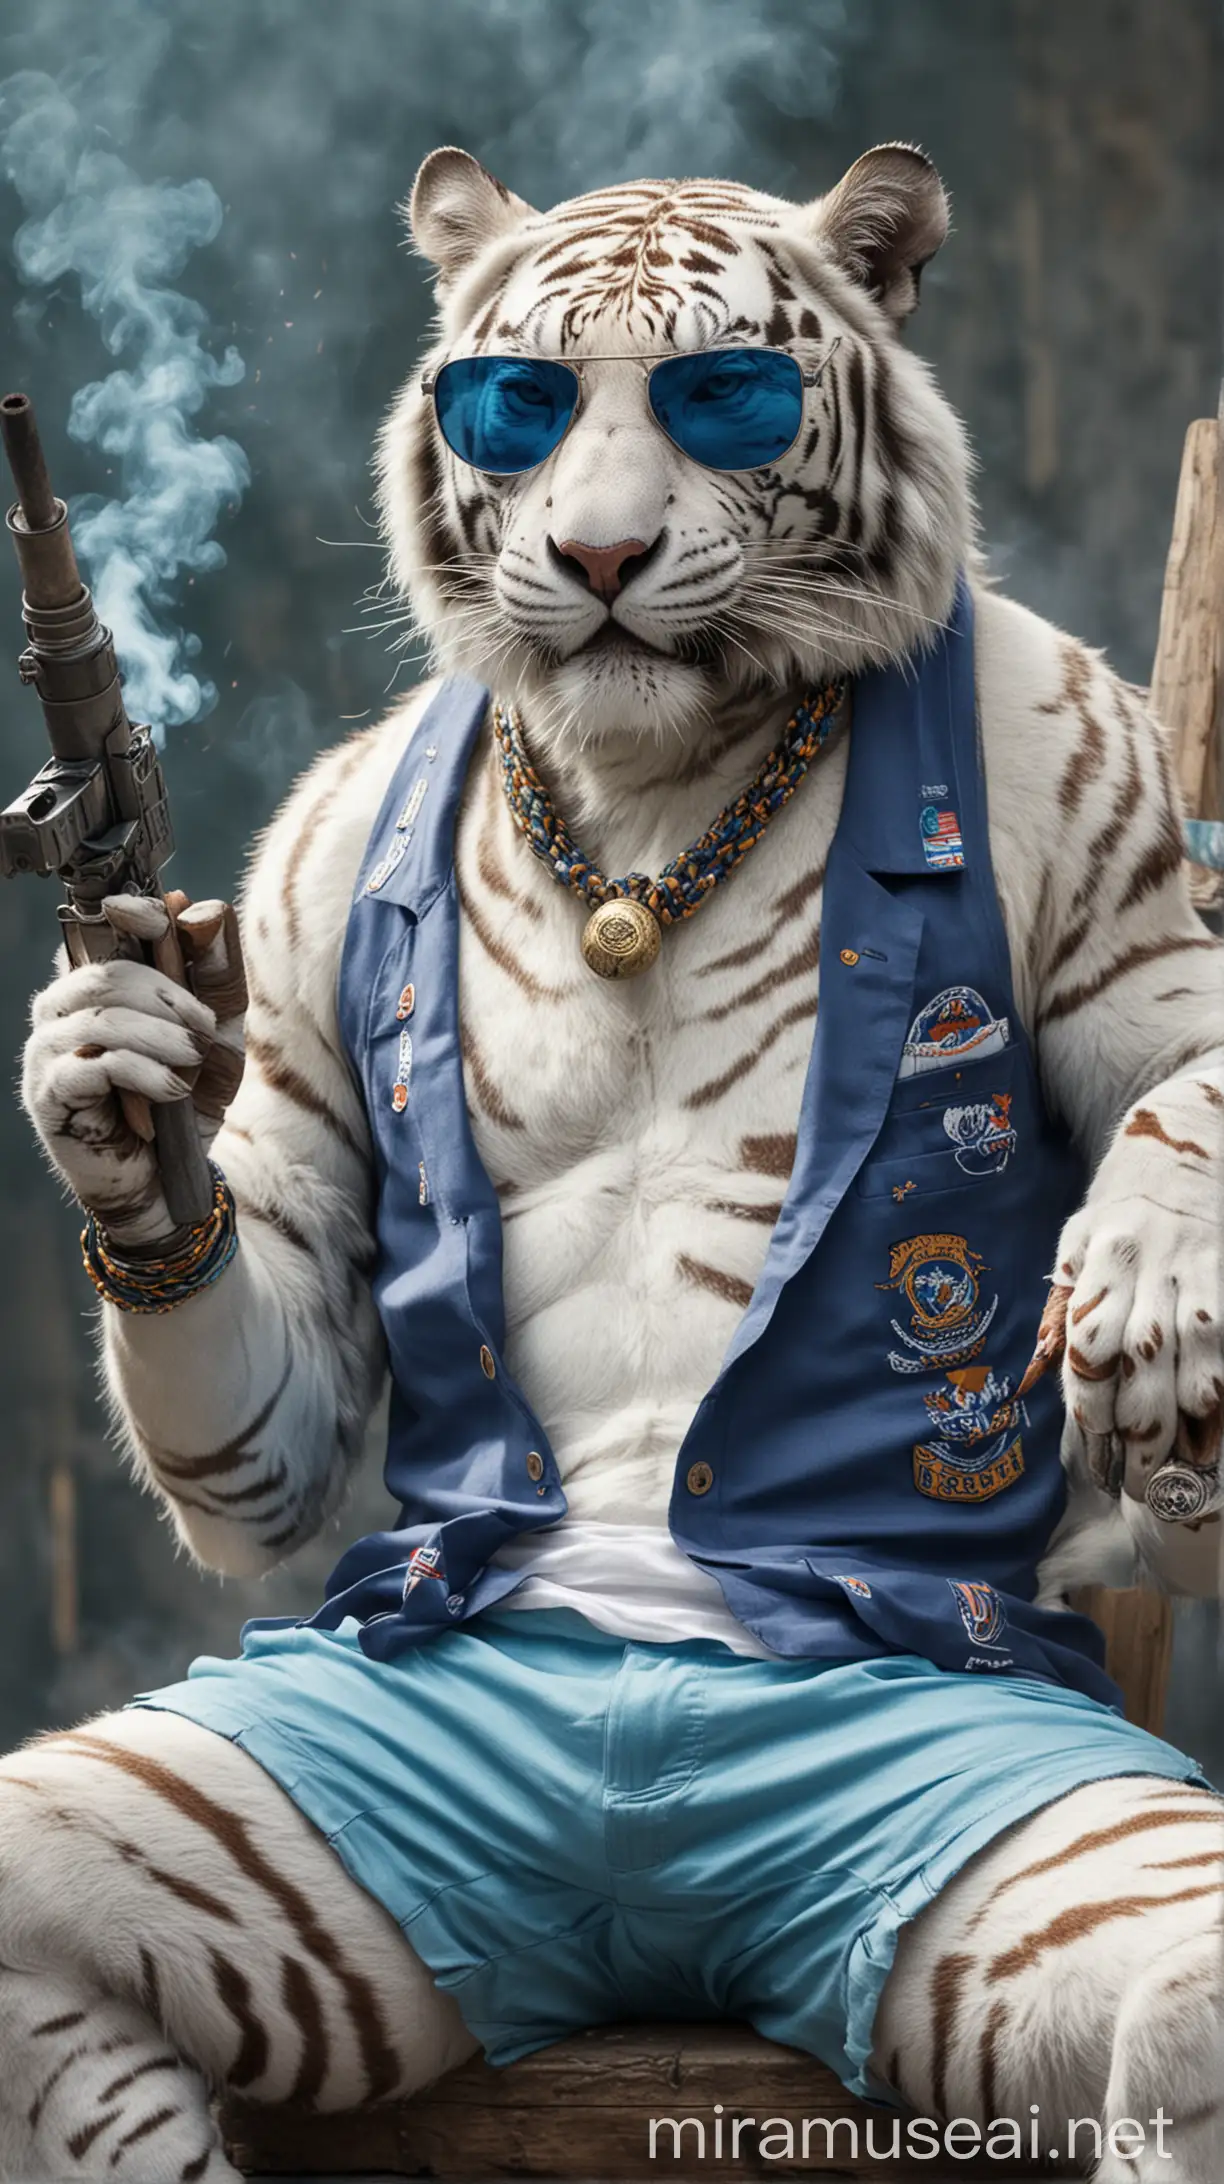 White tiger, wearing shorts and blue sunglasses, sitting like a boss and smoking a cigar, holding a missile gun